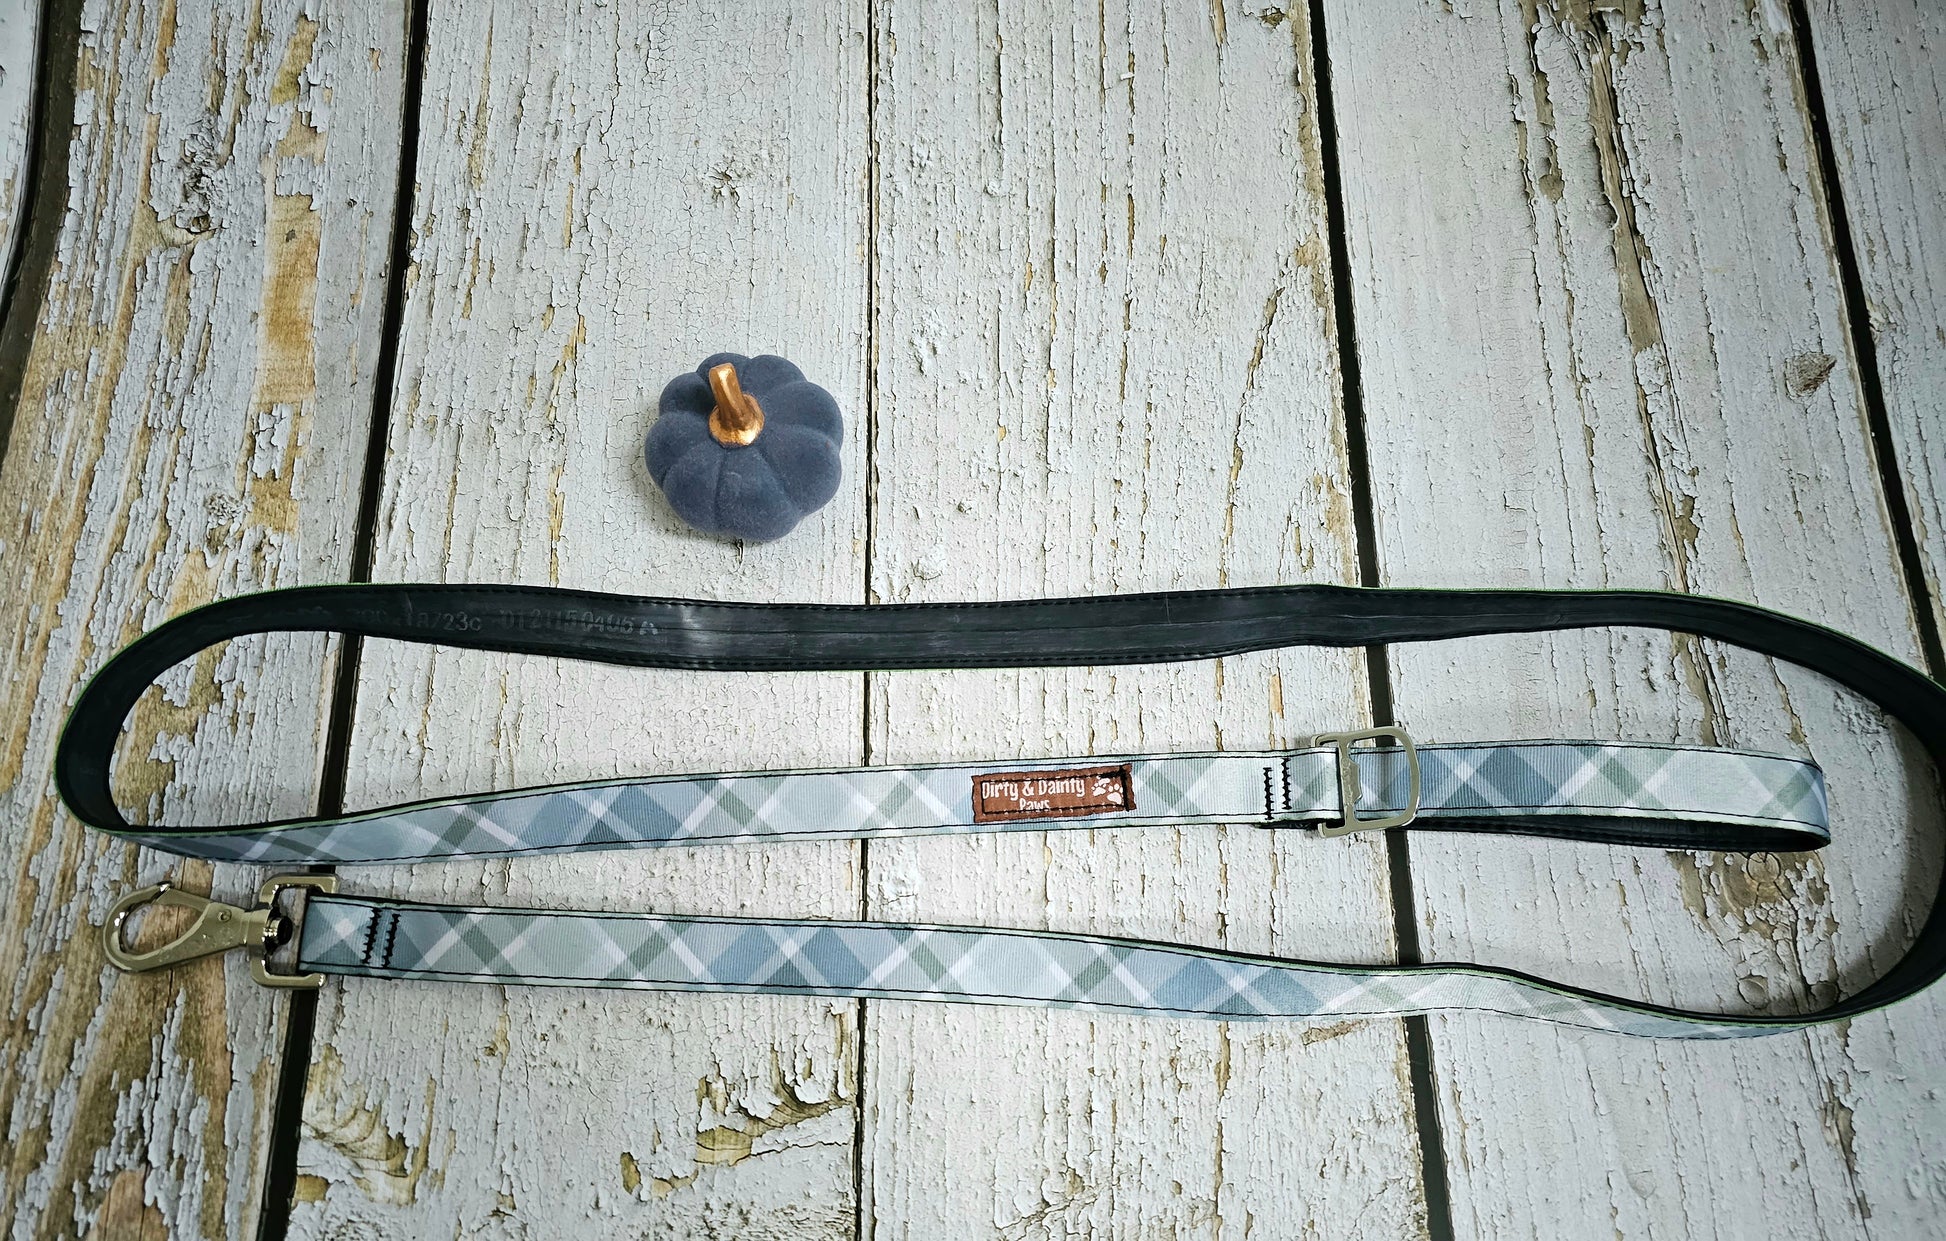 Dirty & Dainty Paws Boho Blue Plaid Dog Leash featuring a stylish plaid pattern, durable metal clasp, and a built-in bottle opener. Made from repurposed bicycle tires.